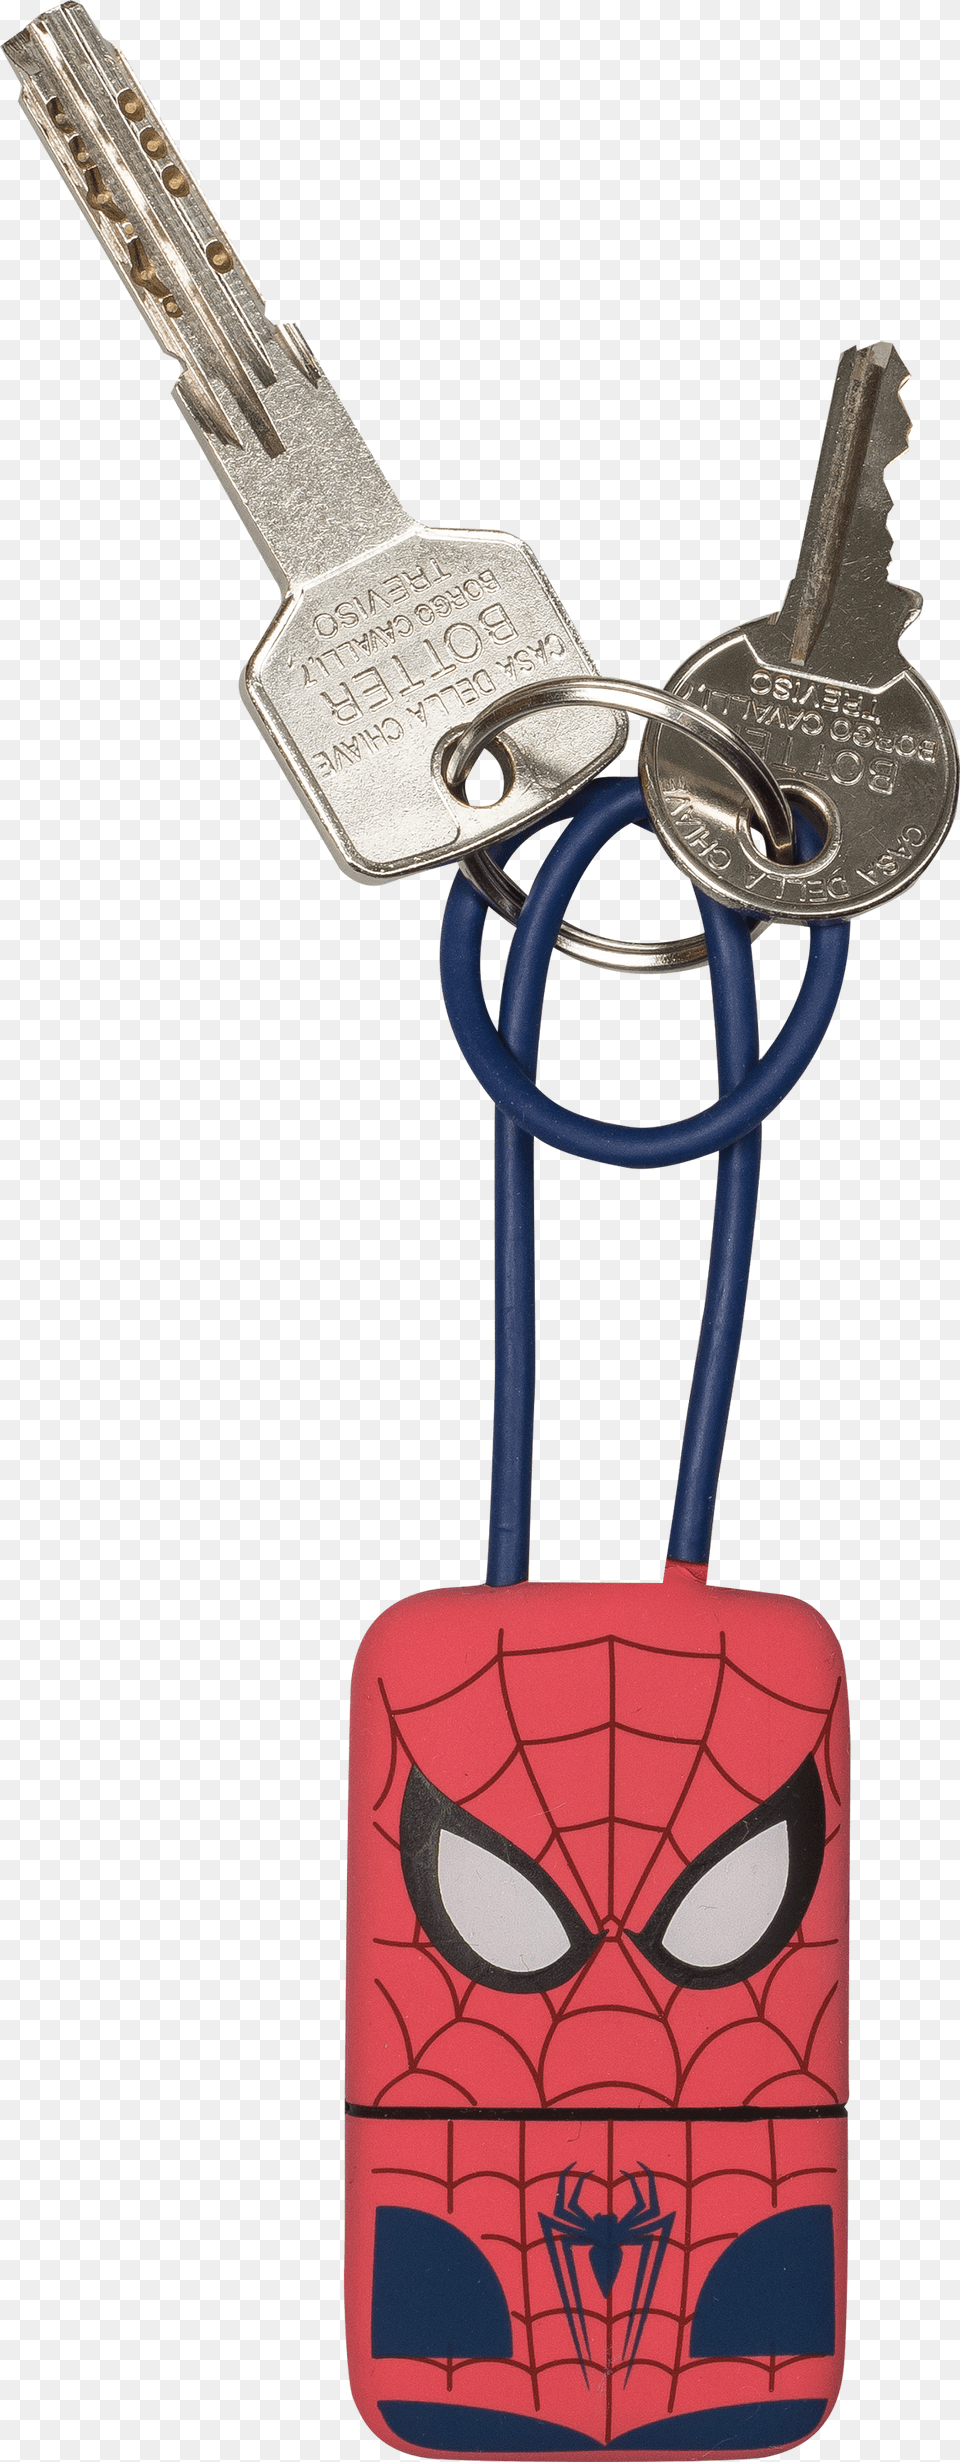 Spiderman Usb Charger, Key Png Image